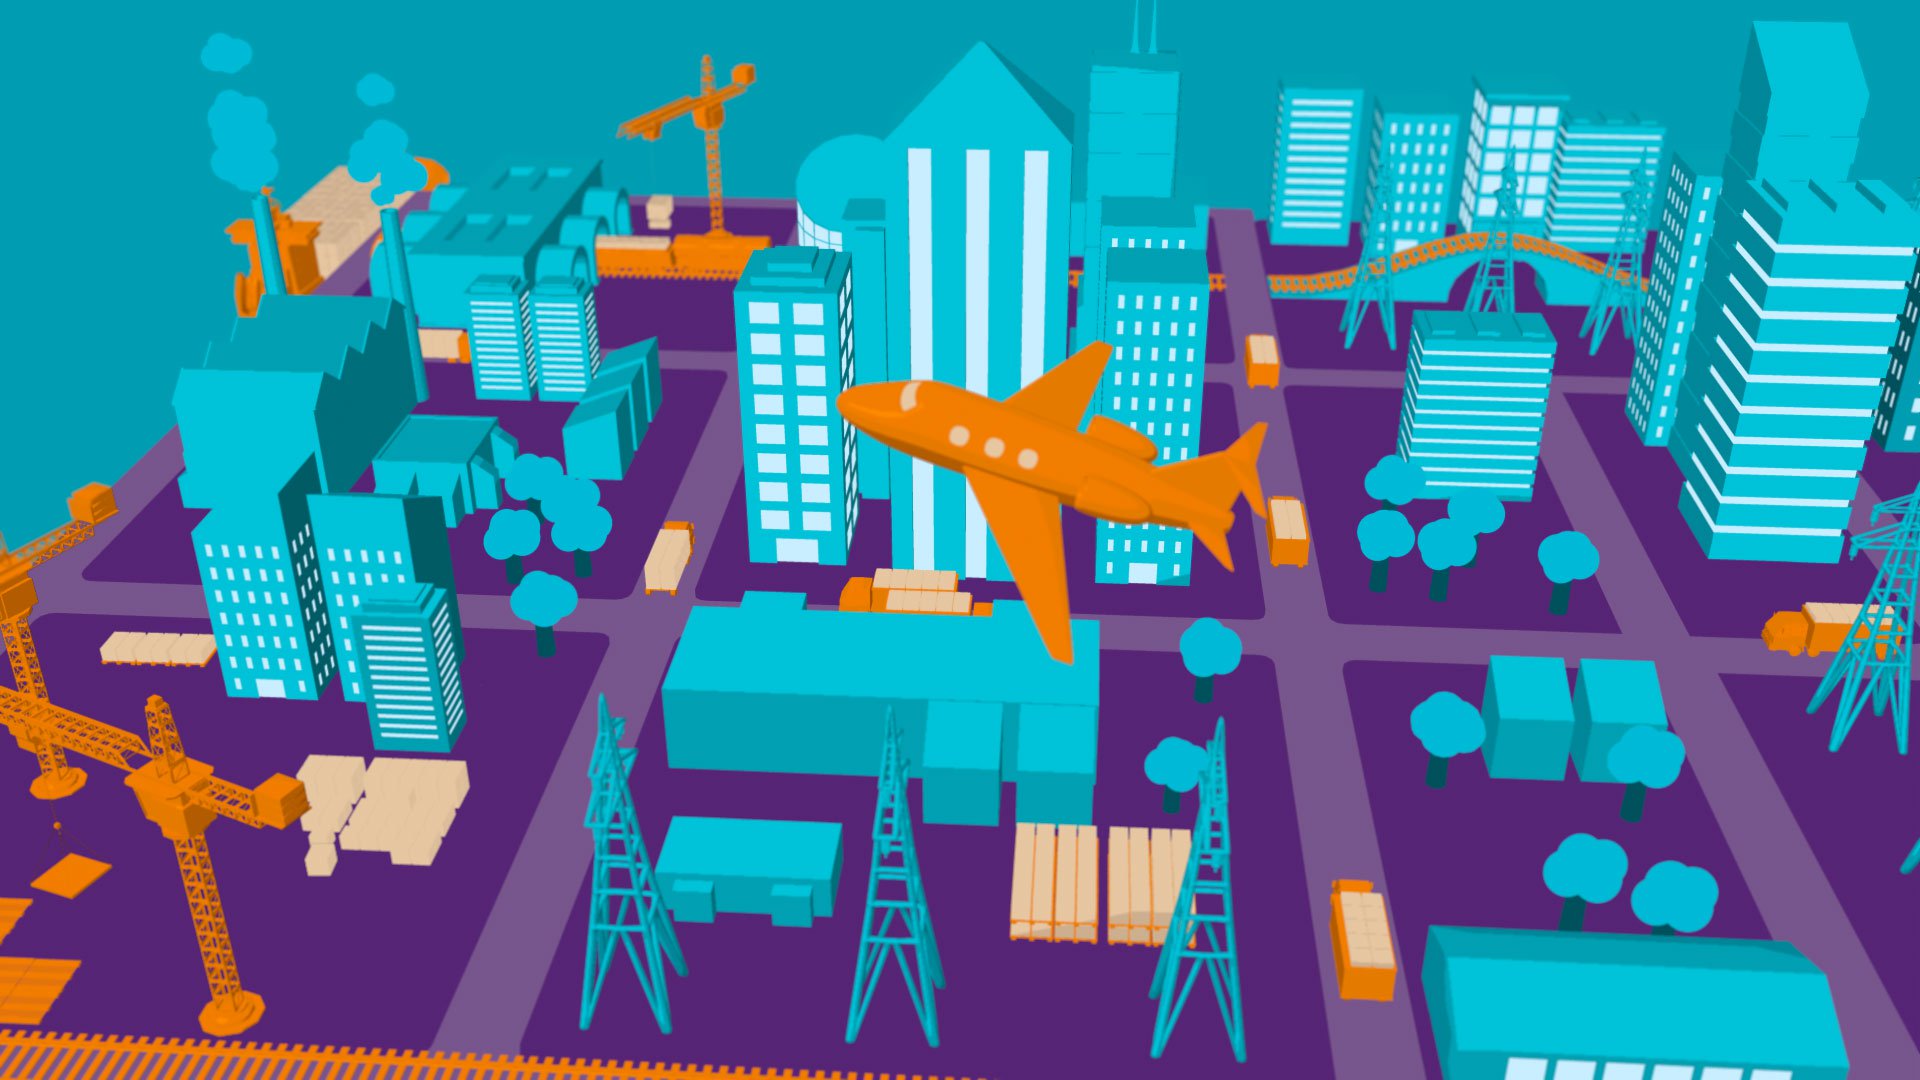 Animation Still of an orange Plane Flying Over a blue and purple City